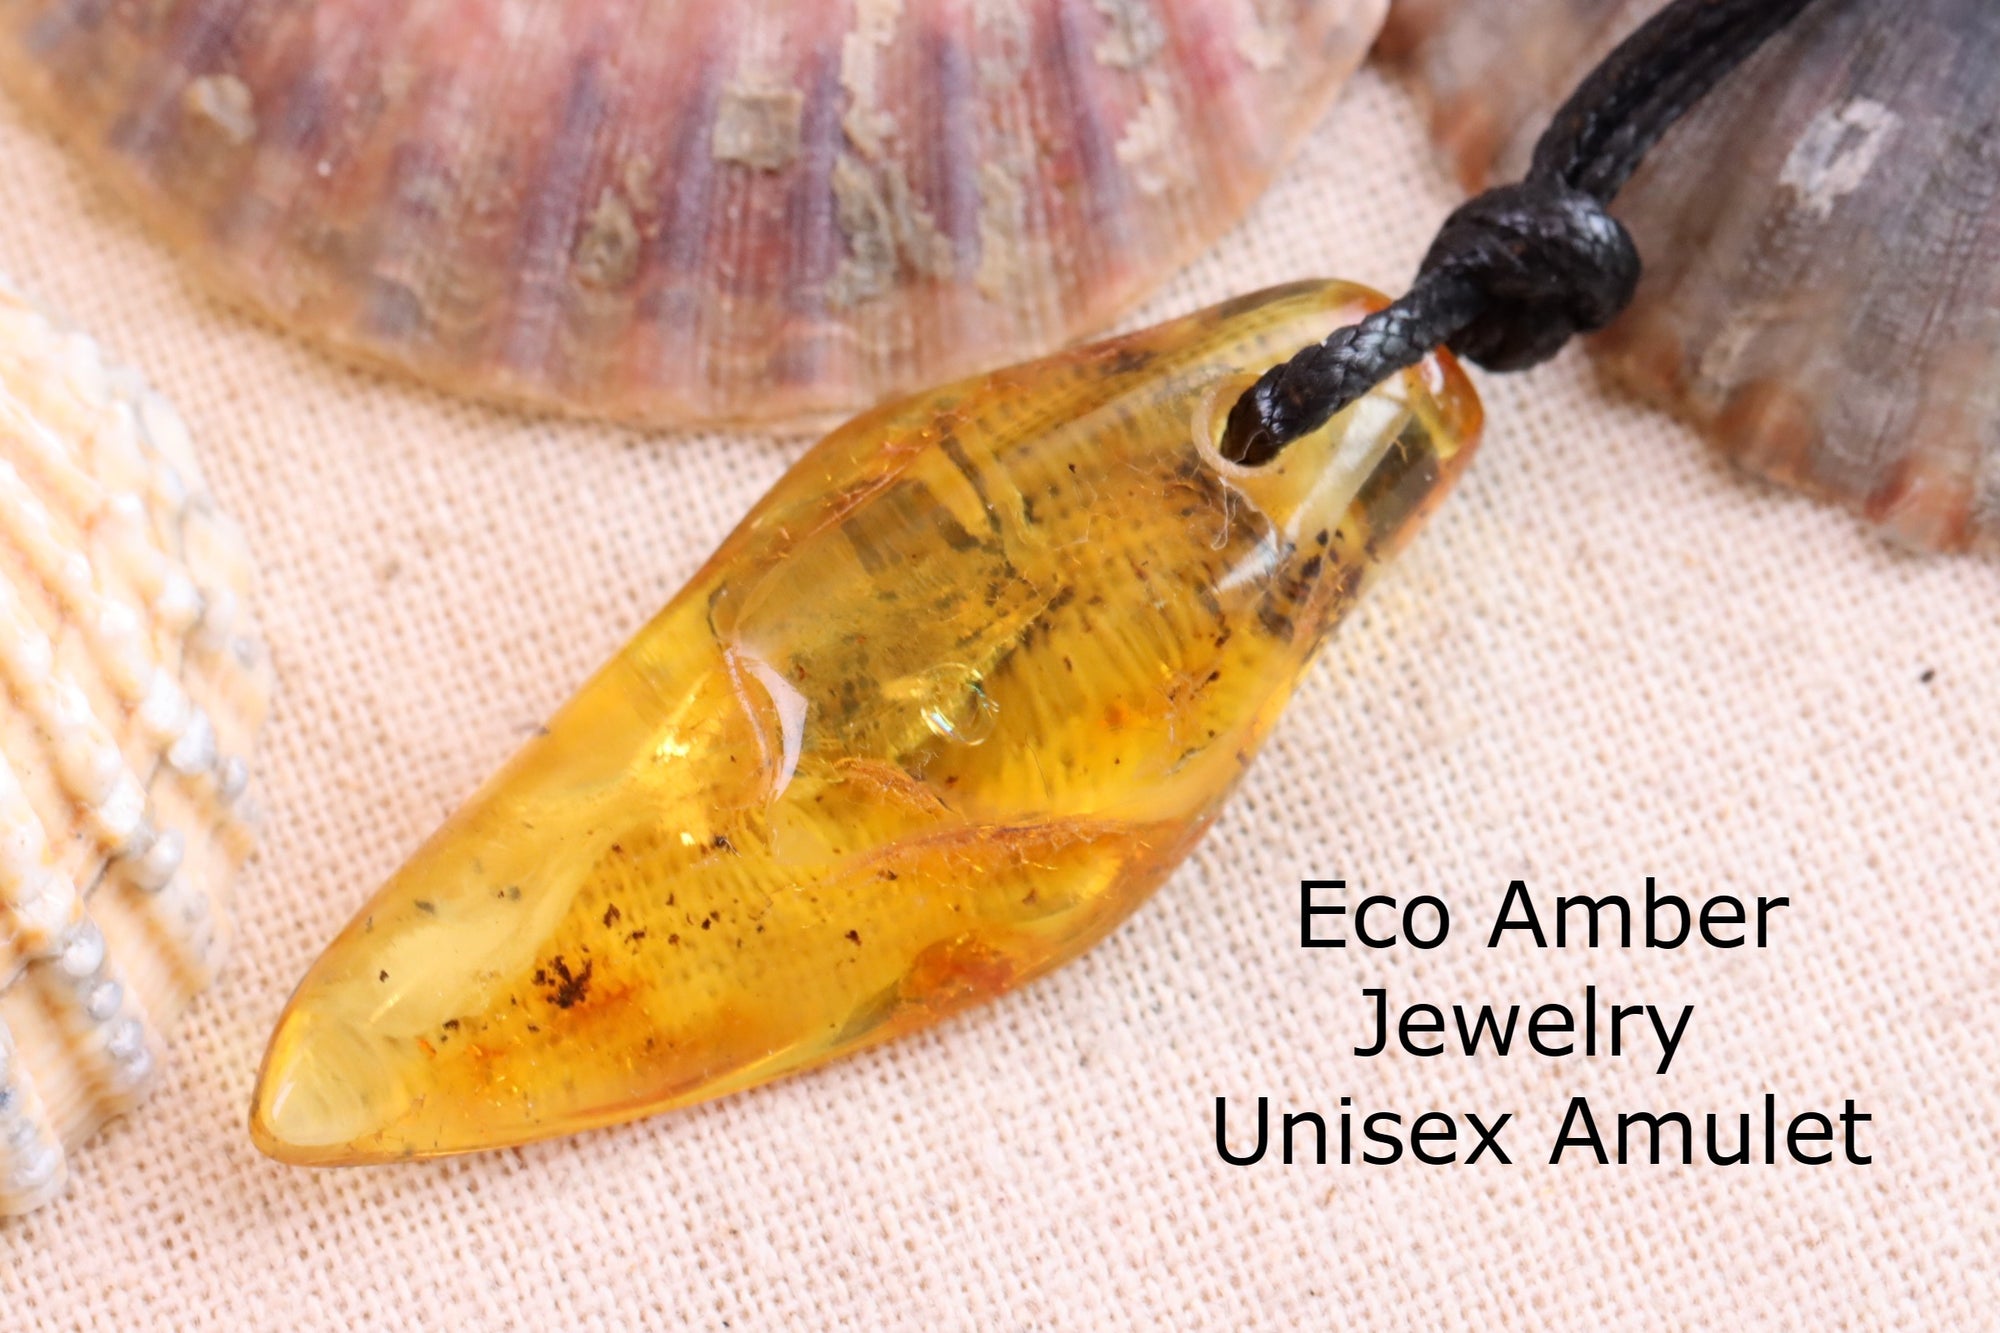 Natural Handmade Baltic Amber Amulet Pendant on adjustable cord Special offer FREE extra Amulet